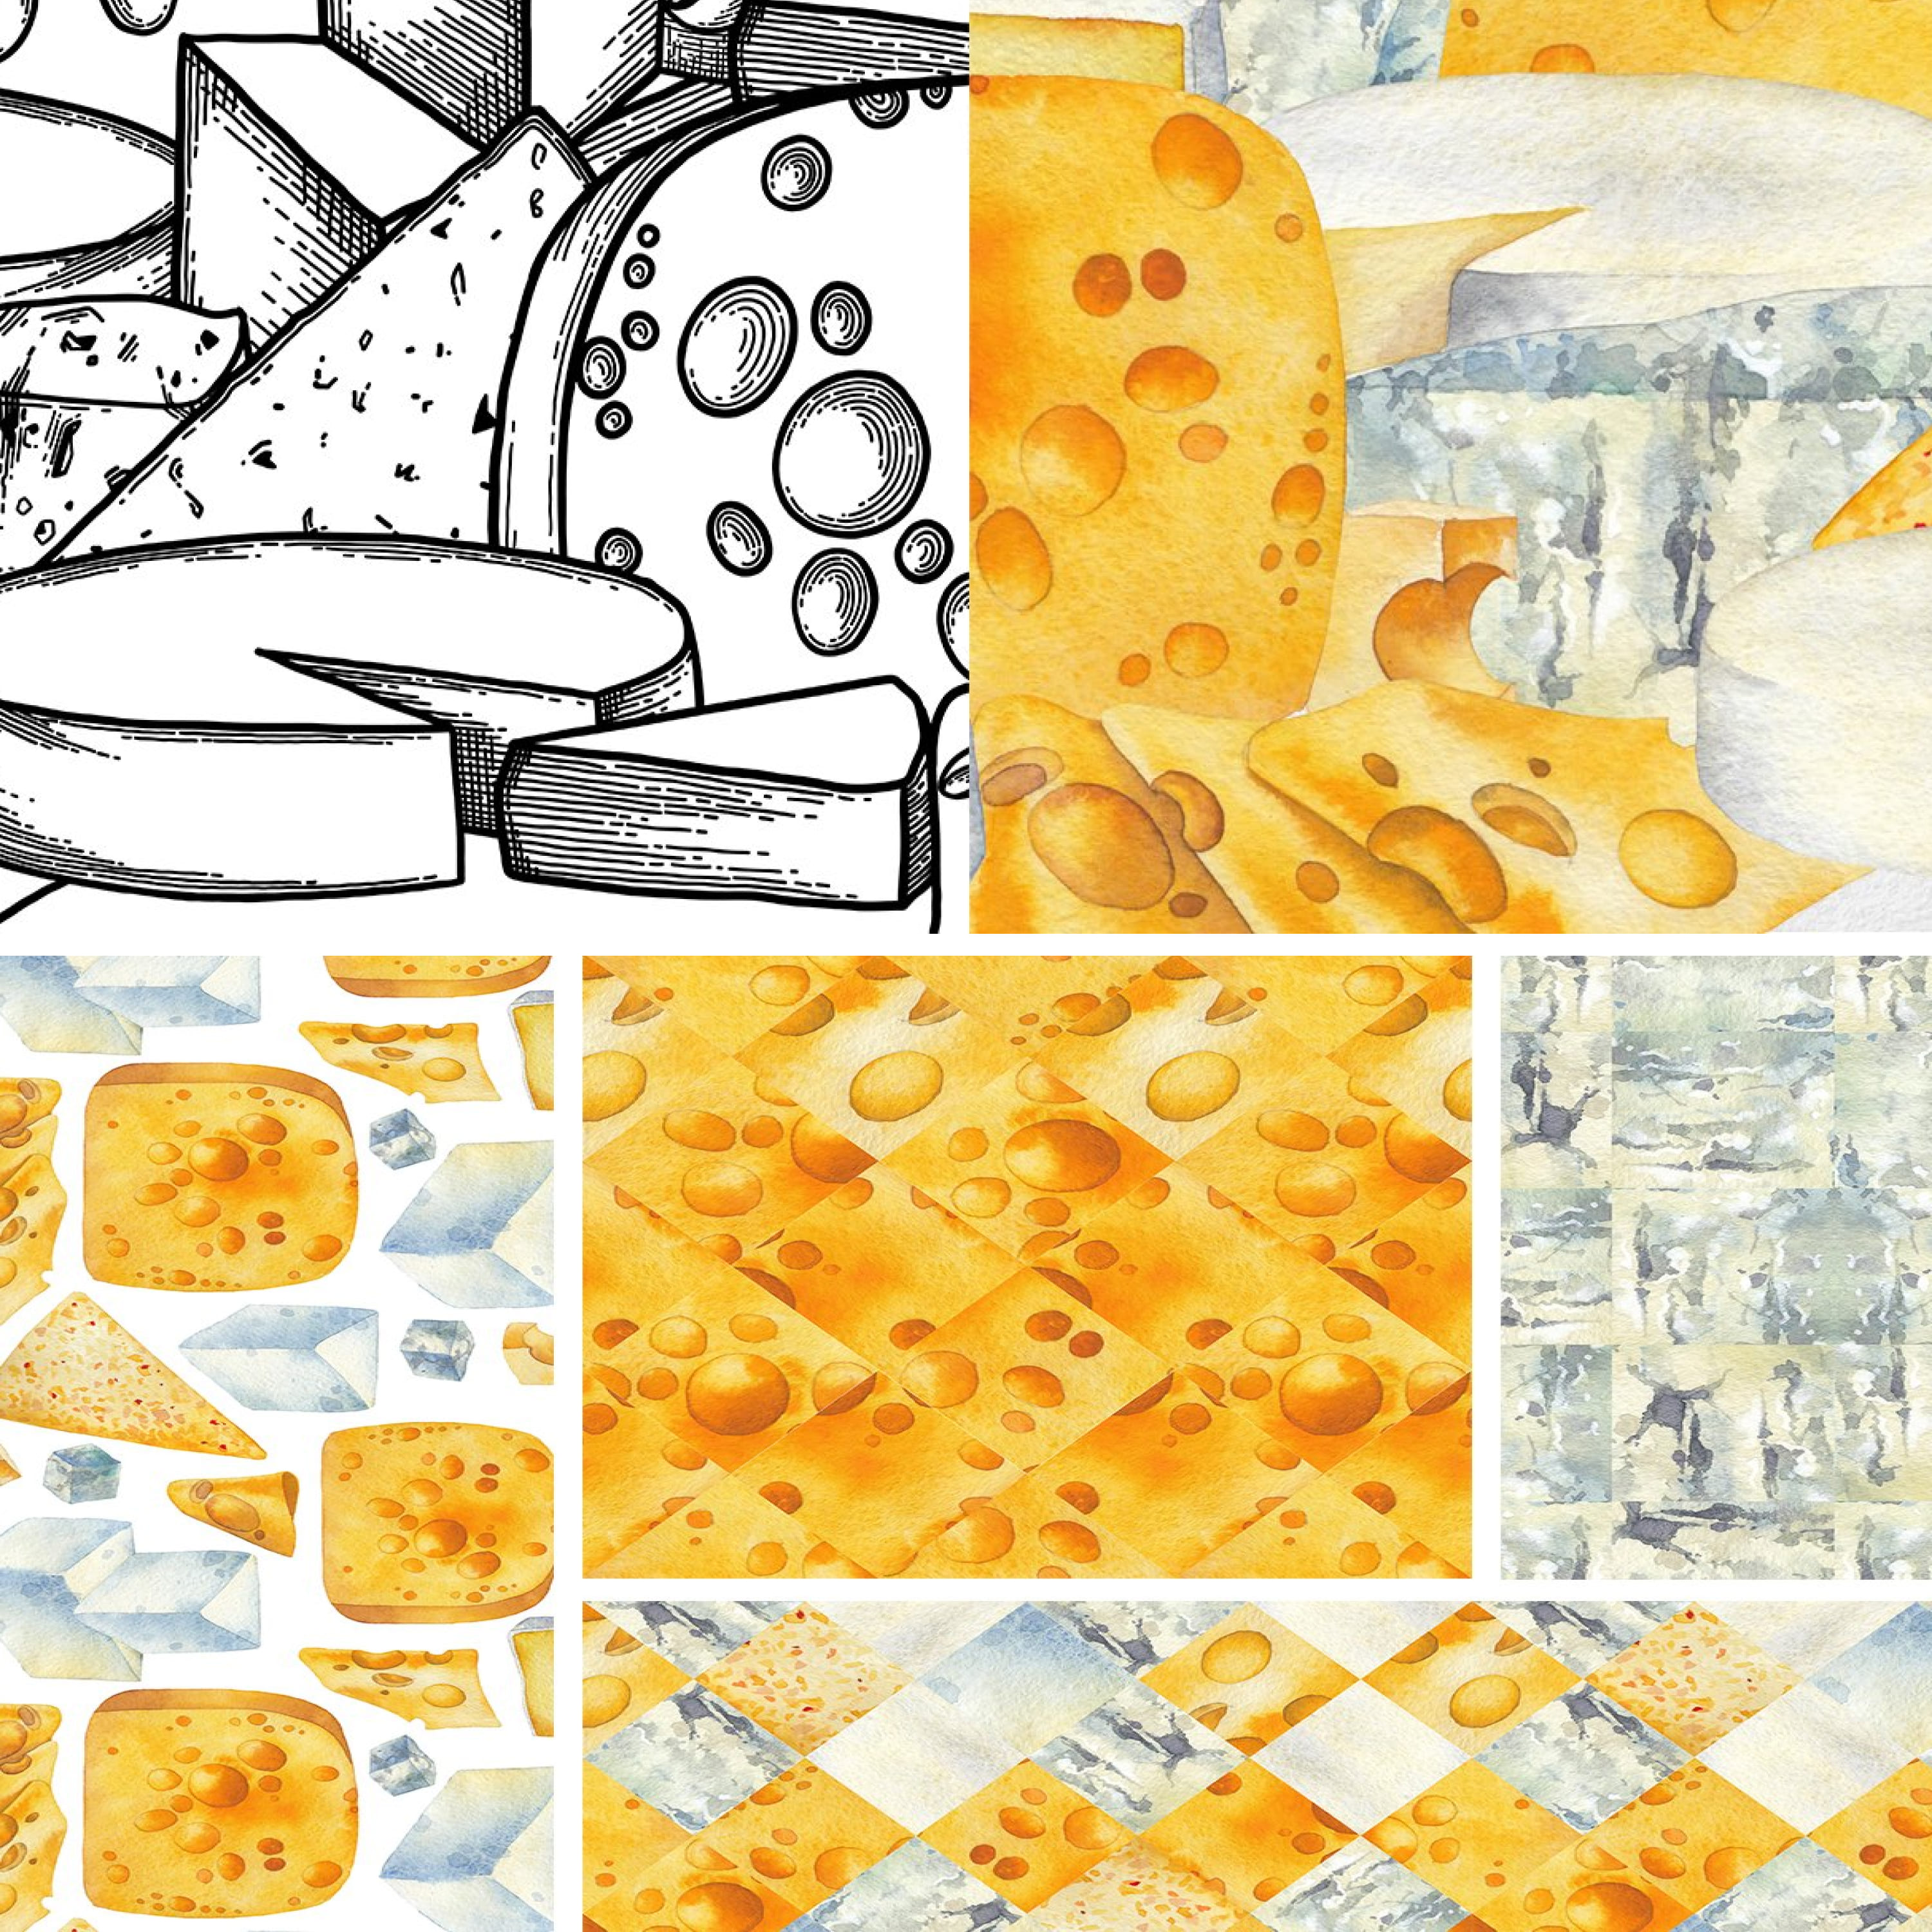 Set of colorful images of hard cheeses.